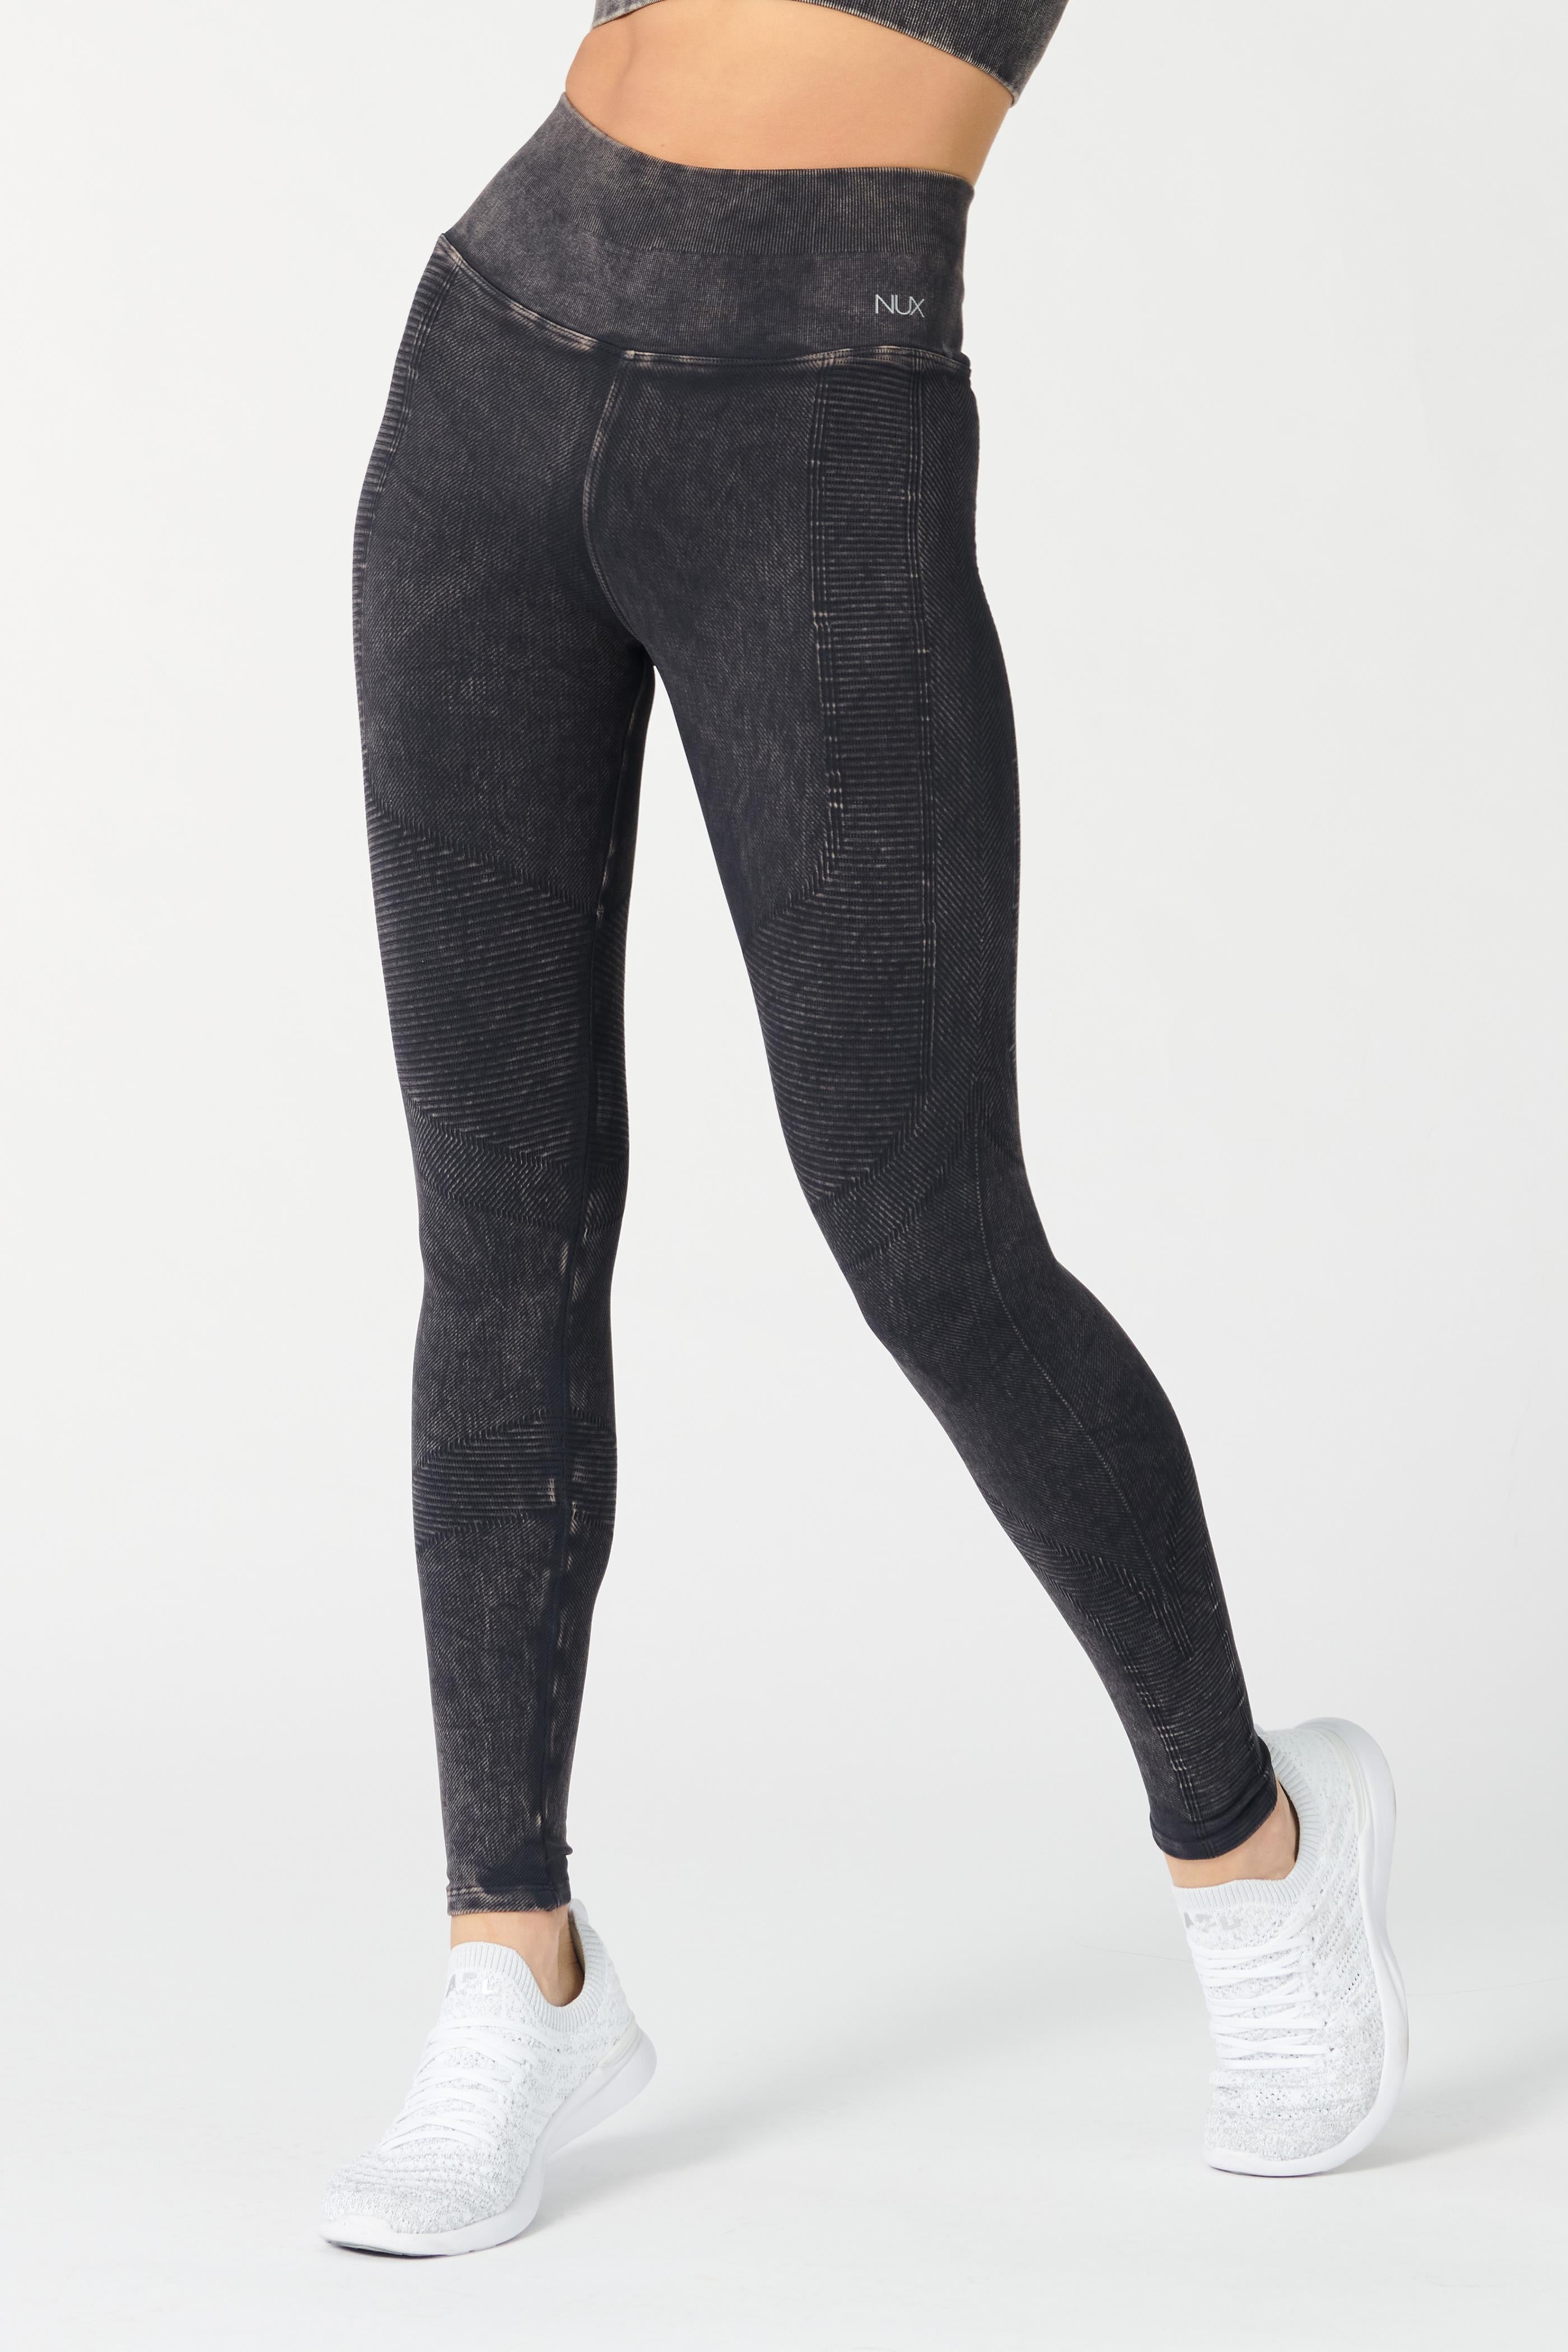 one-by-one-legging1